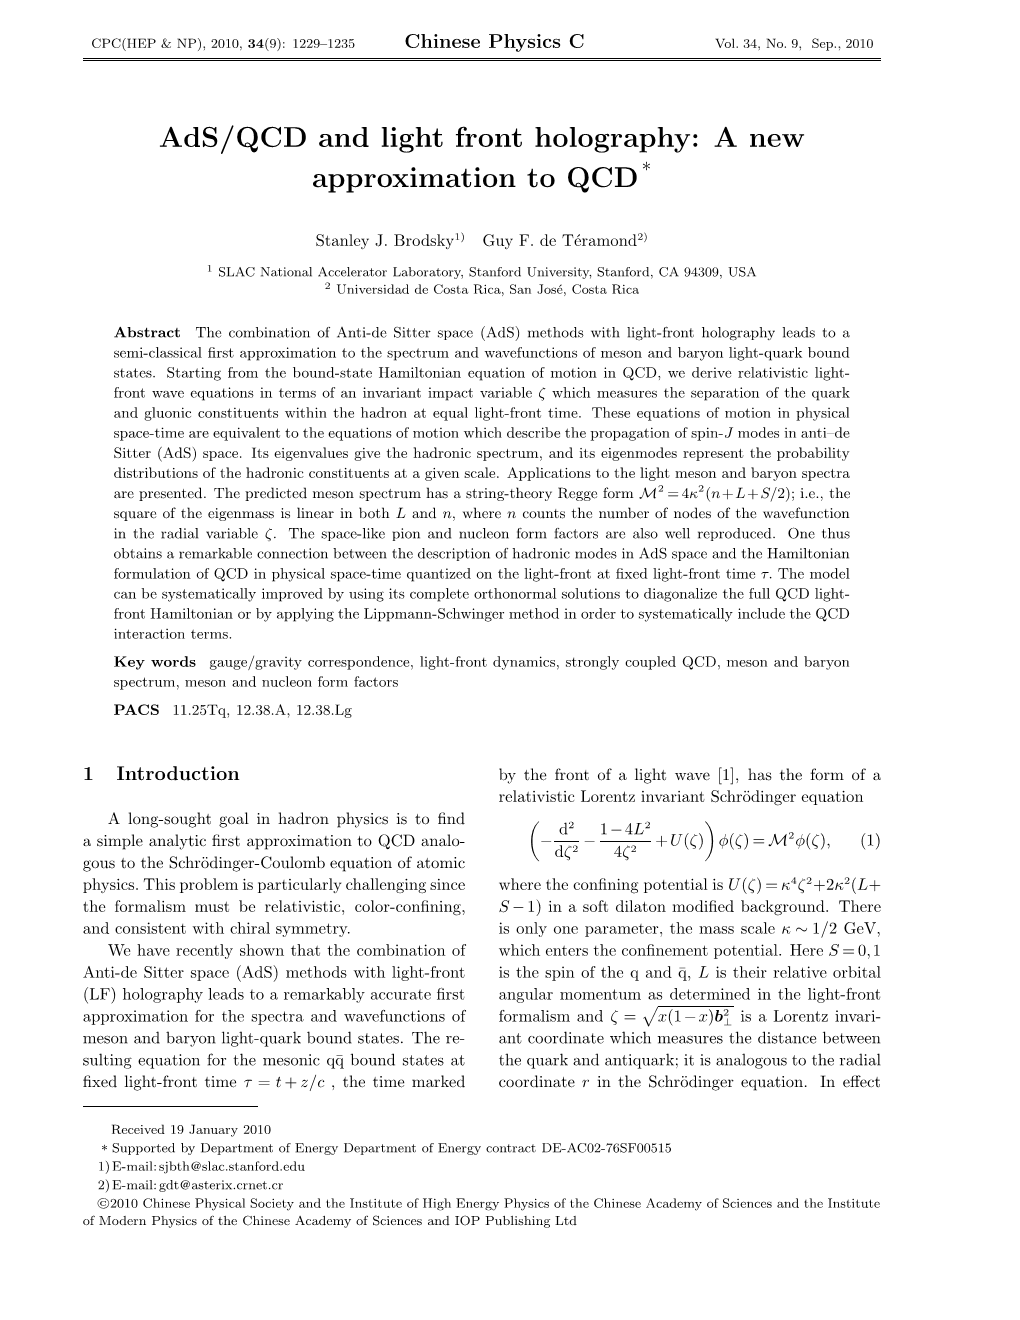 Ads/QCD and Light Front Holography: a New Approximation to QCD*